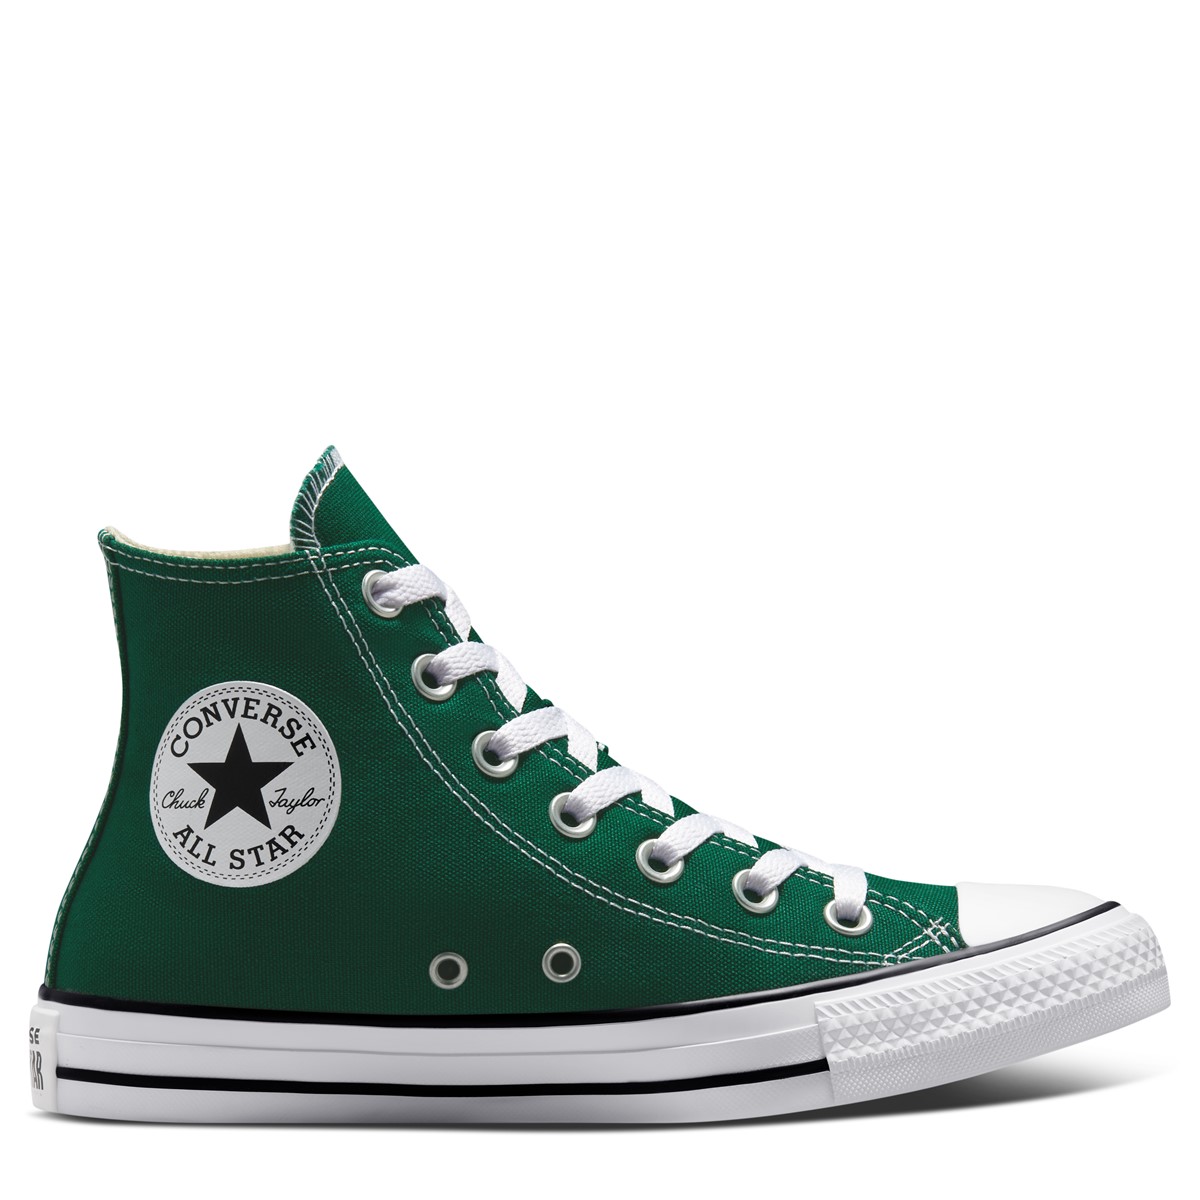 Chuck Taylor All-Star Hi Sneakers in Green